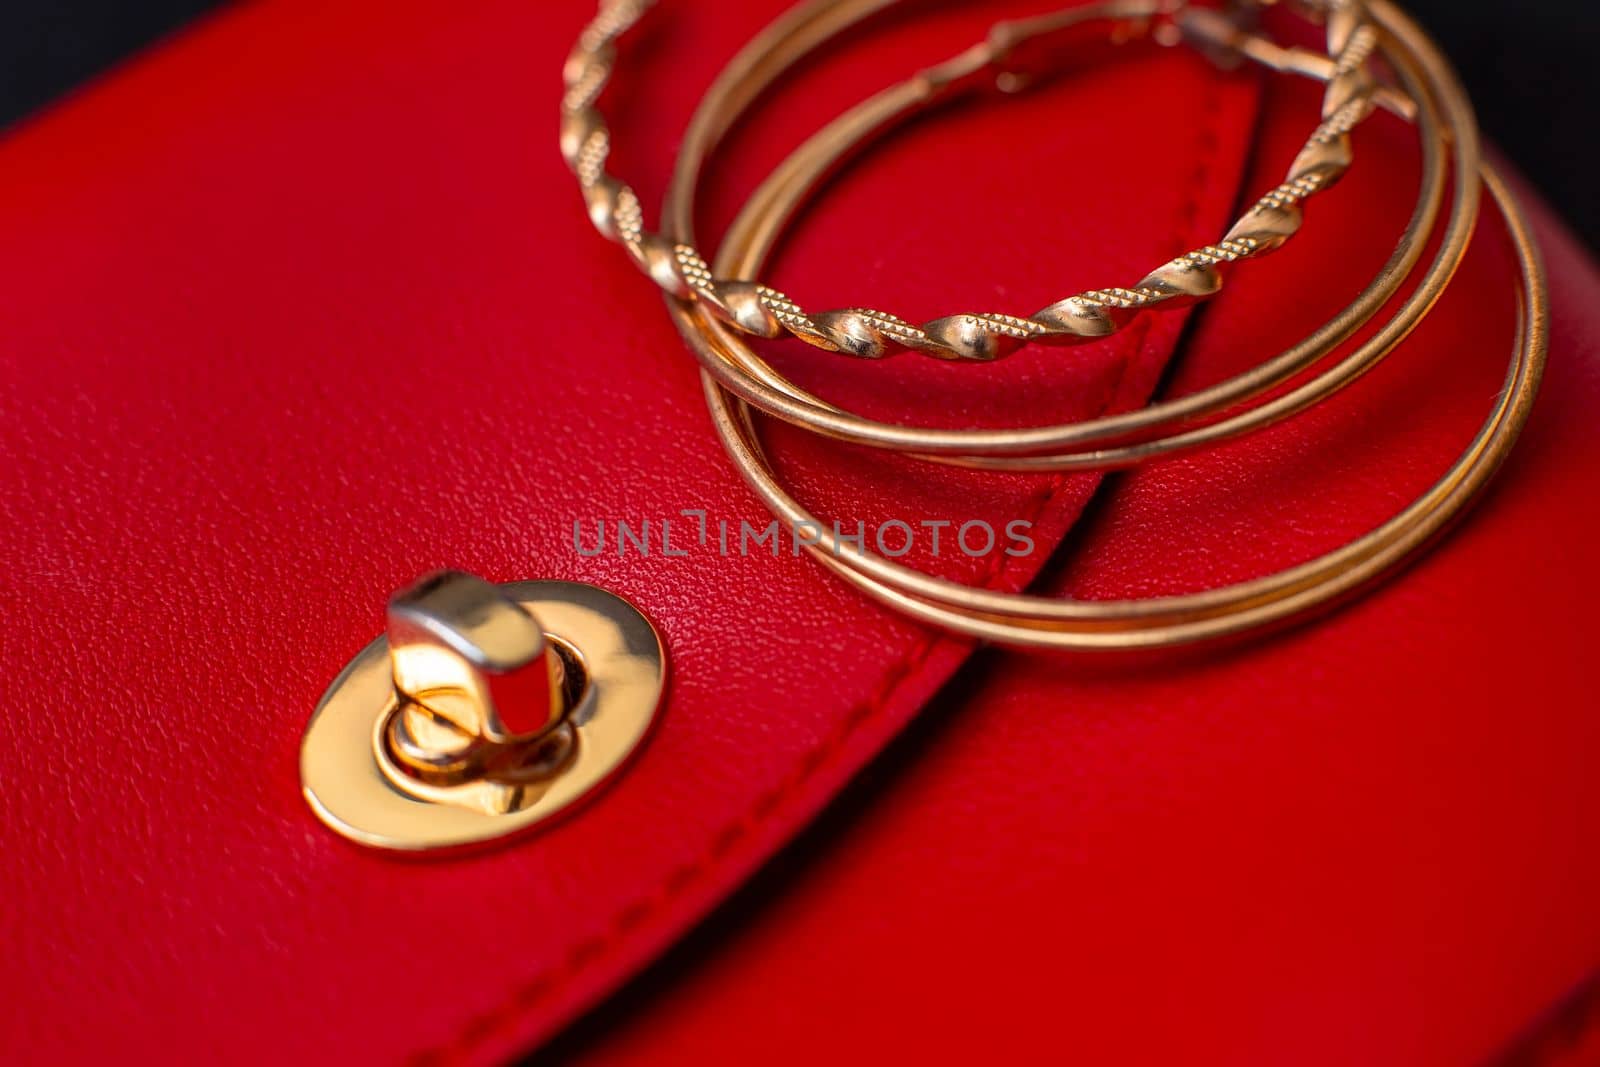 Three gold hoop earrings lie on a red leather bag. Close up. Copy space